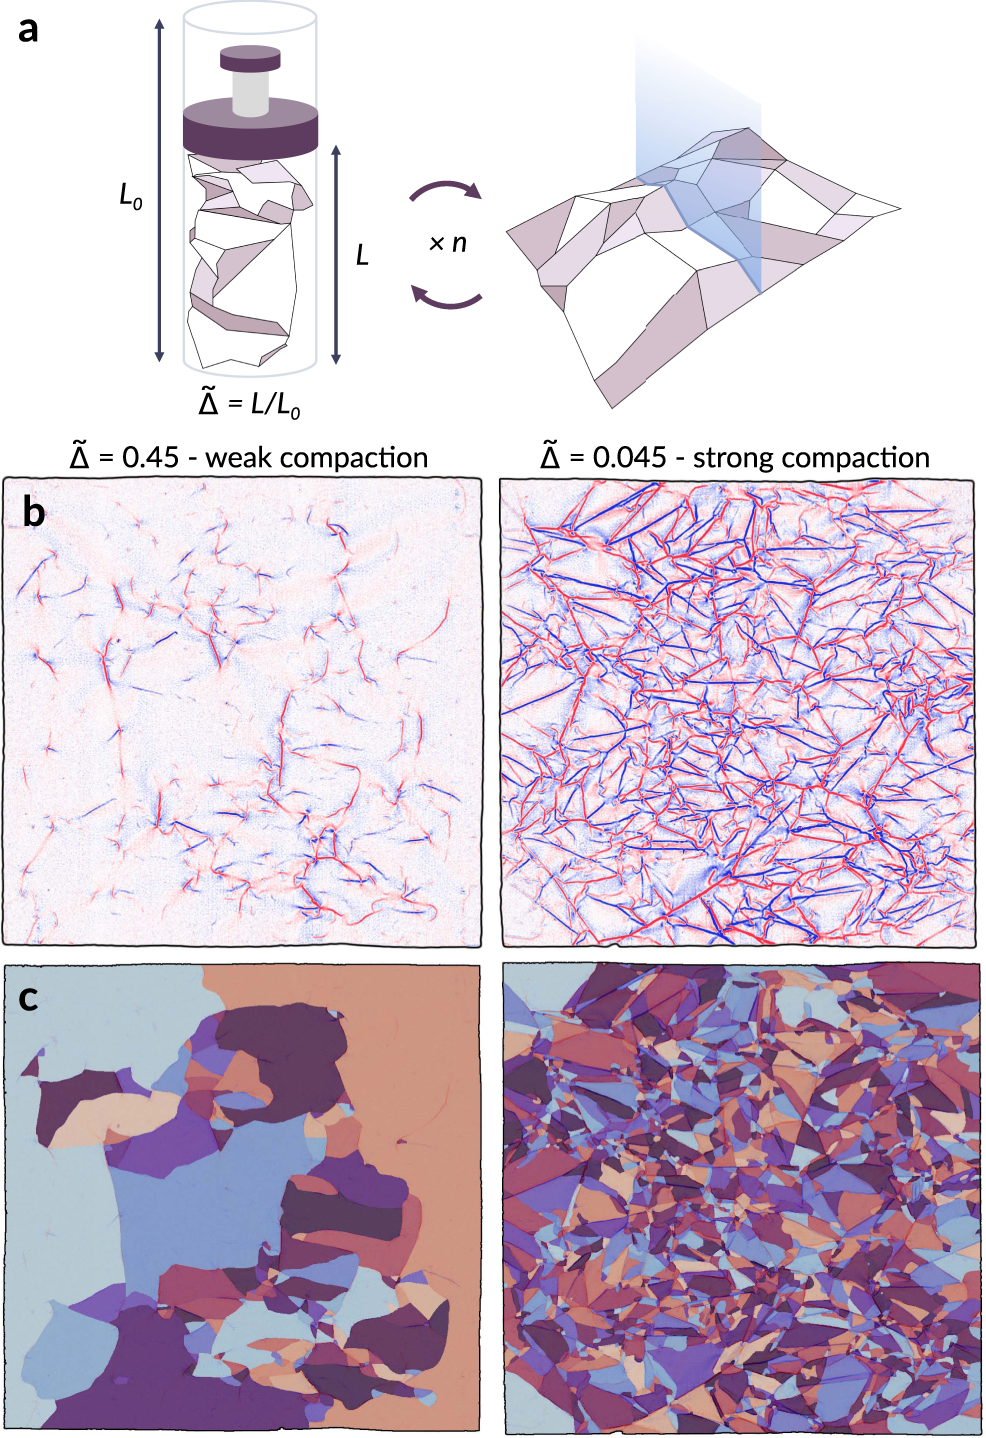 A Model For The Fragmentation Kinetics Of Crumpled Thin Sheets Nature Communications